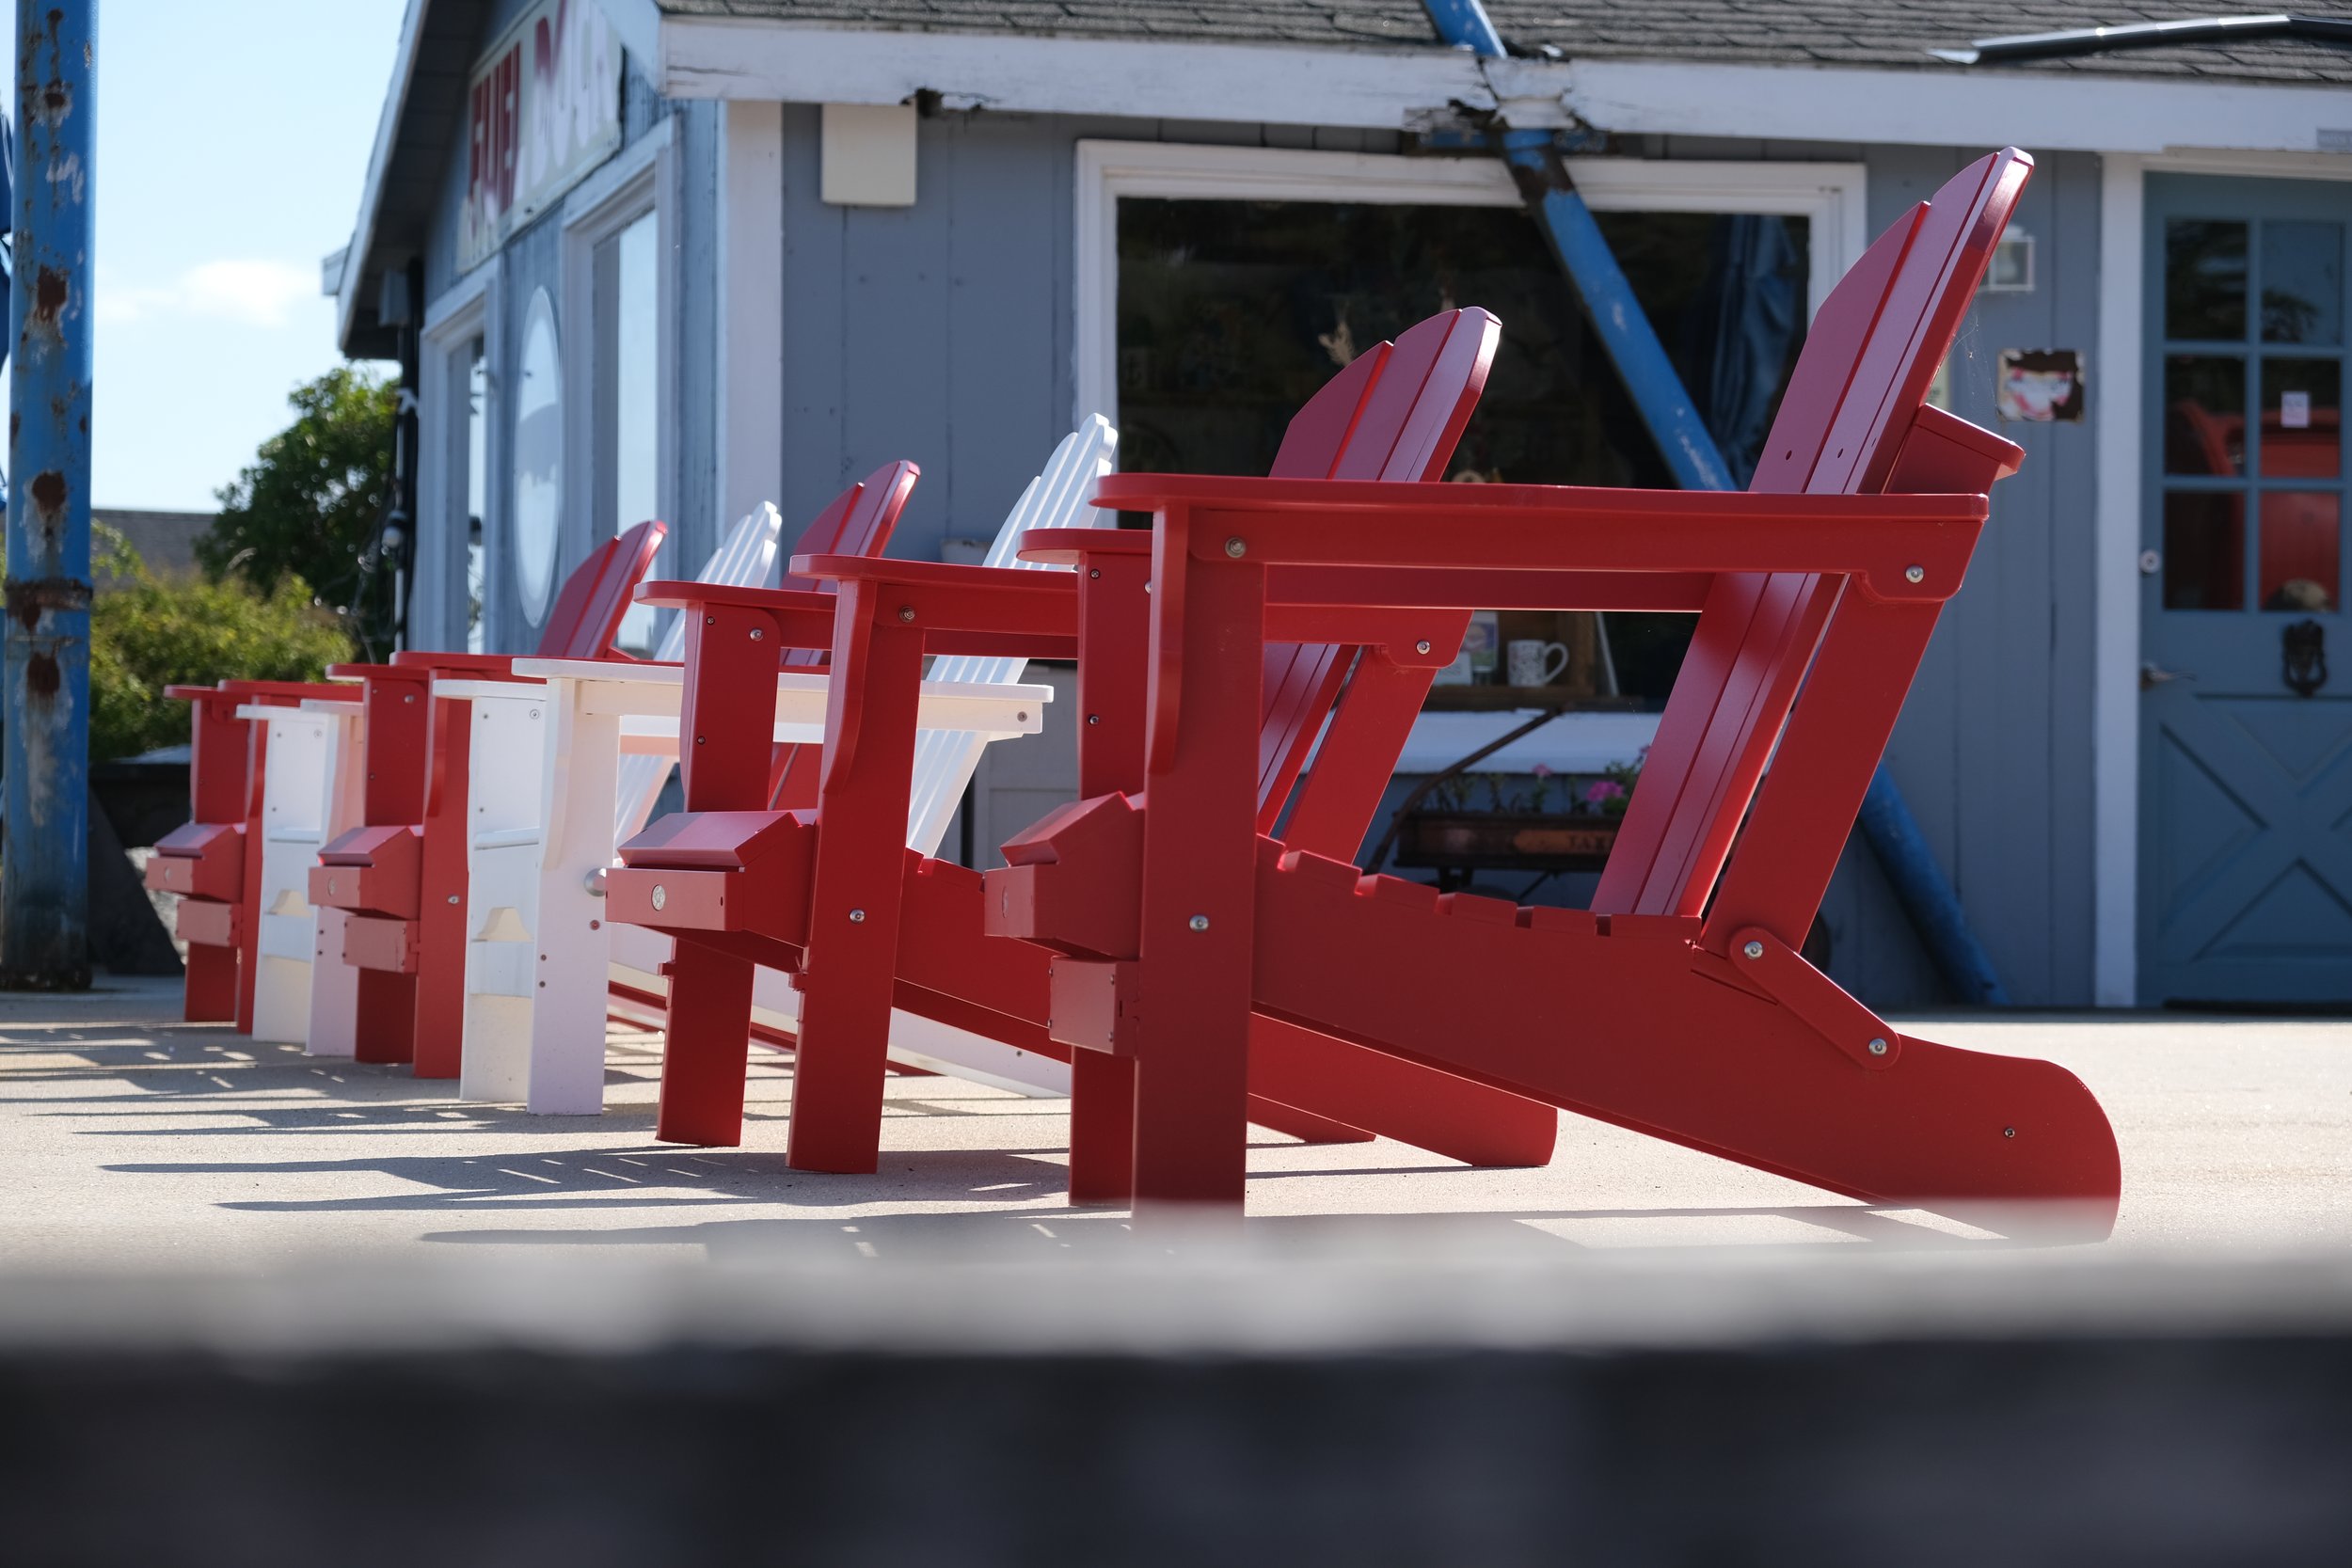   Adirondack chairs provide resting spots to enjoy a meal.  